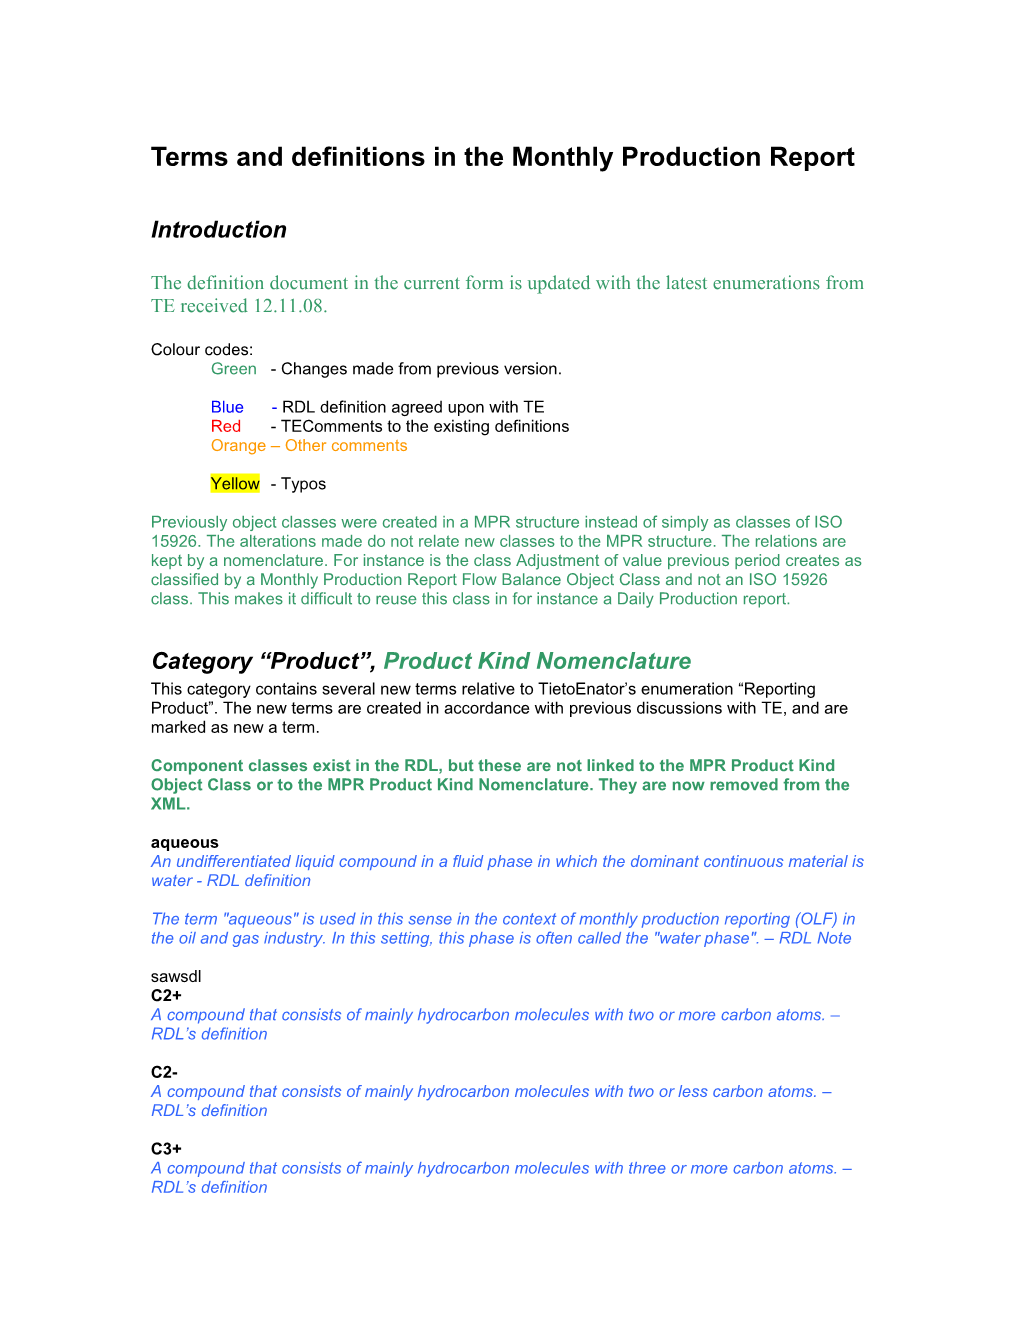 Terms and Definitions in the Monthly Production Report